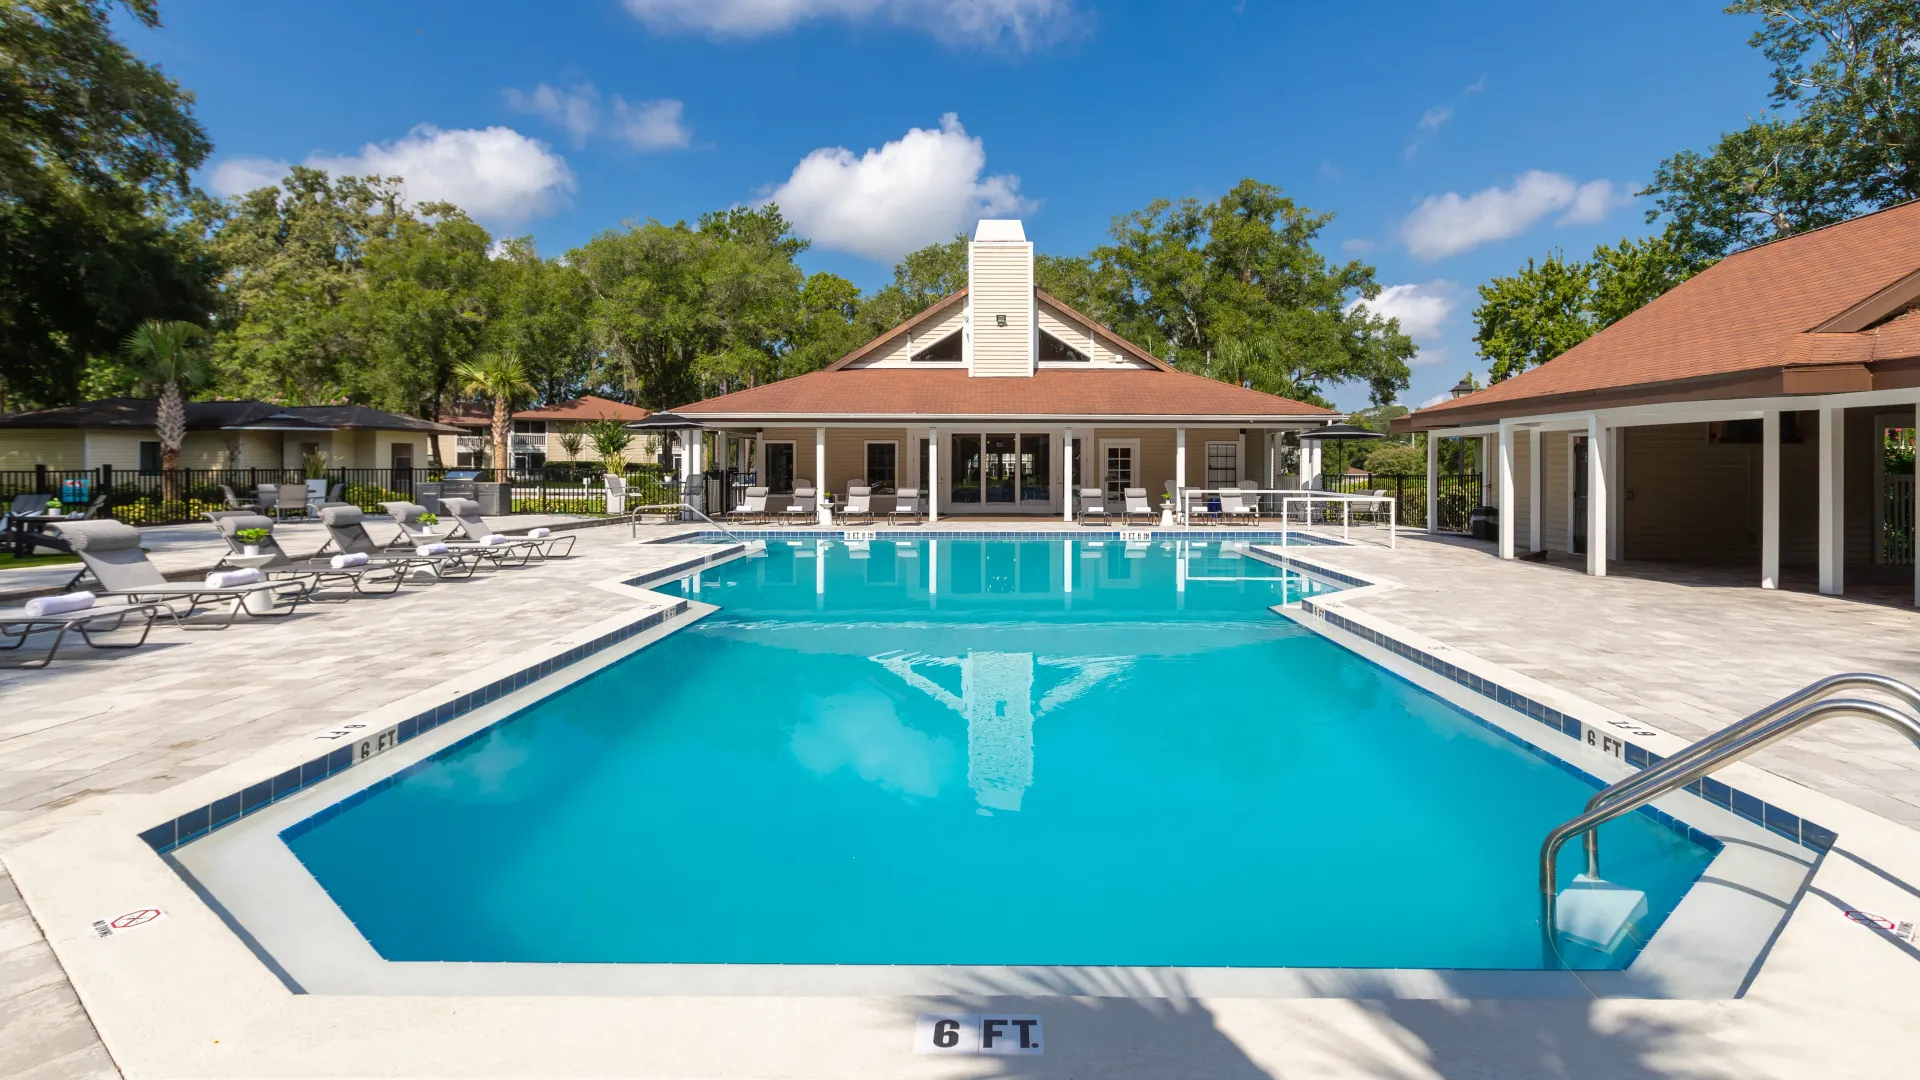 A sparkling pool awaits, inviting you to take a refreshing plunge and escape the Florida heat.